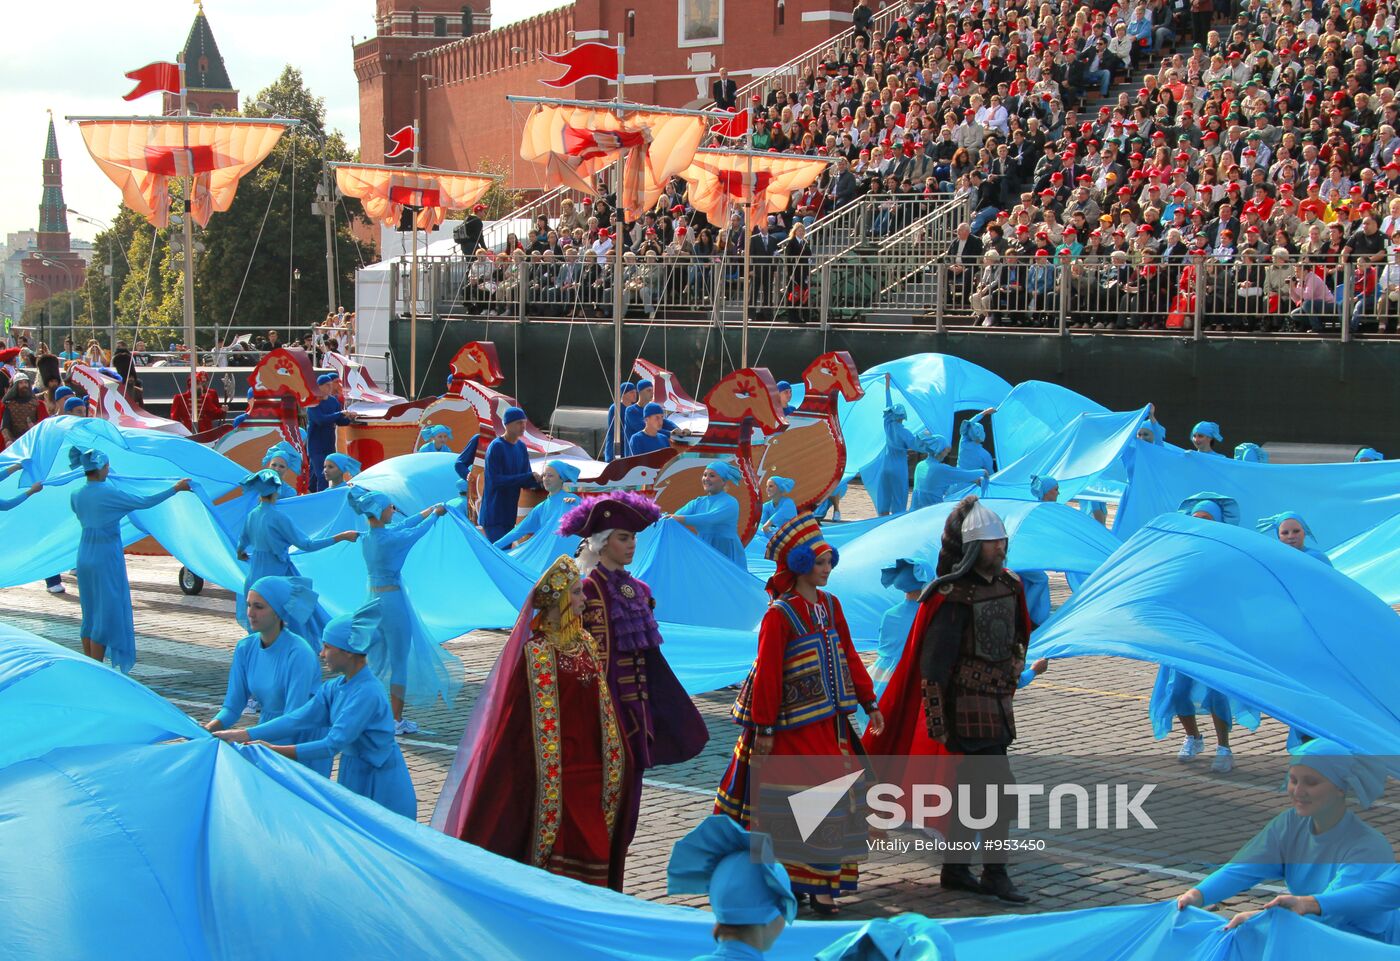 Opening ceremony of Moscow City Day celebrations